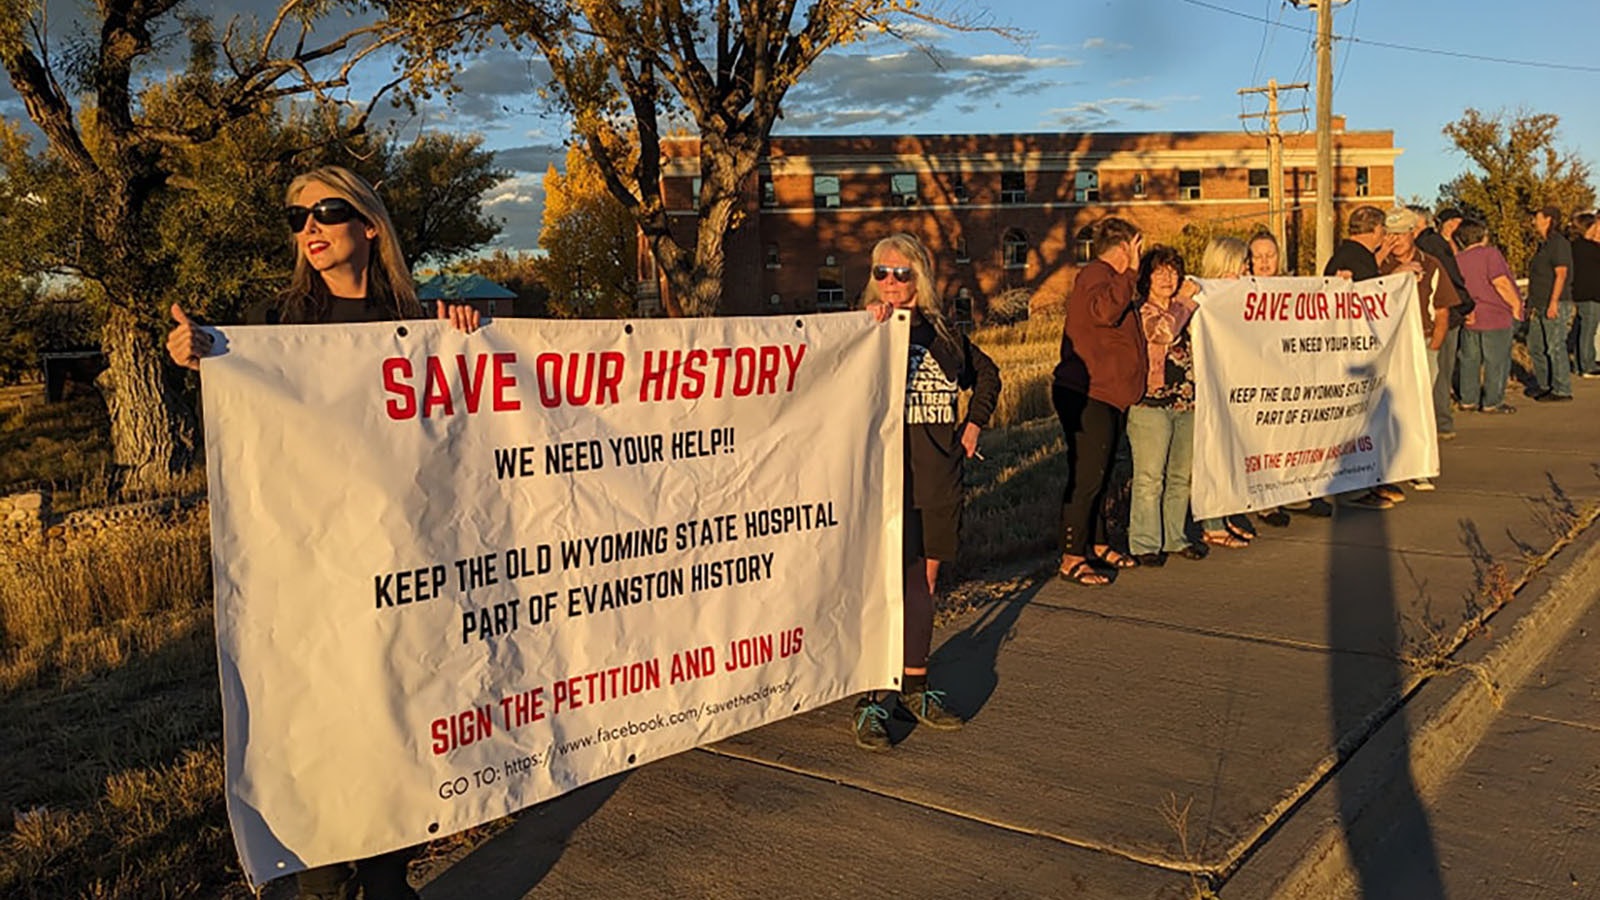 Proponents of saving several buildings on the old Wyoming State Hospital campus held a rally in Evanston recently. They say the efforts of a public relations campaign are starting to take hold.